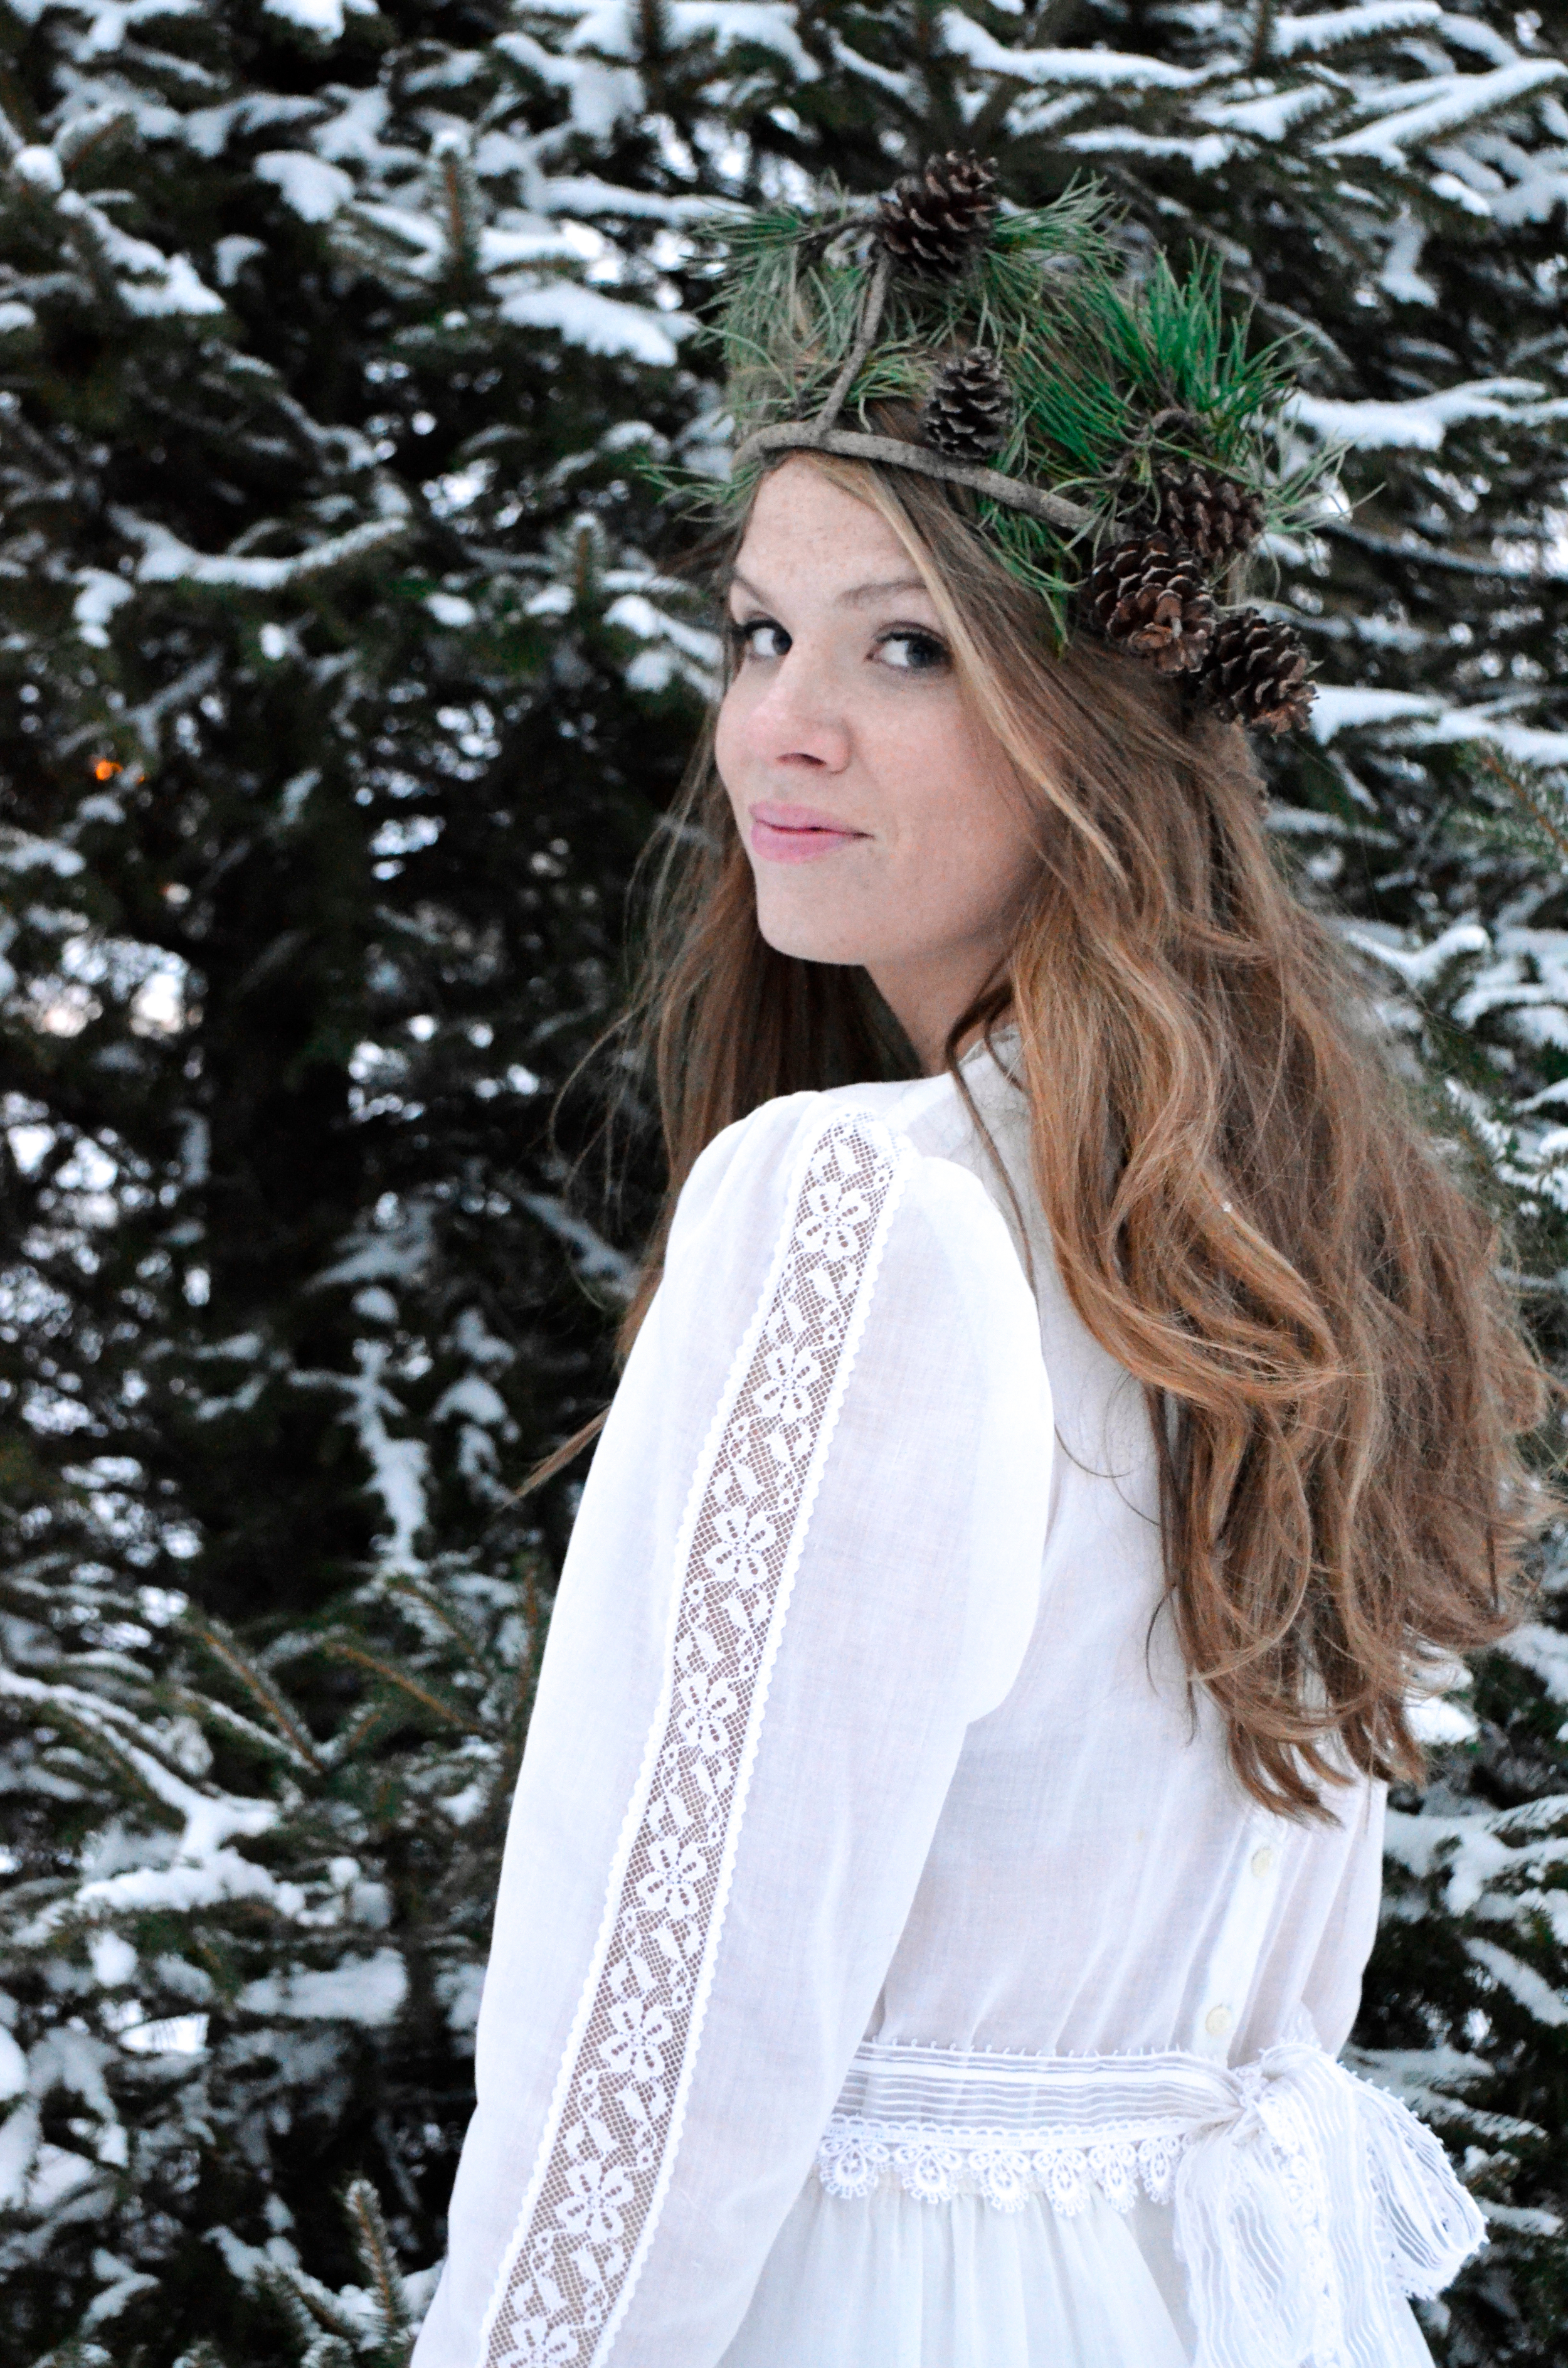 The Lion the Witch and the Wardrobe Inspired Styled Winter Photography Shoot (17 of 20).jpg